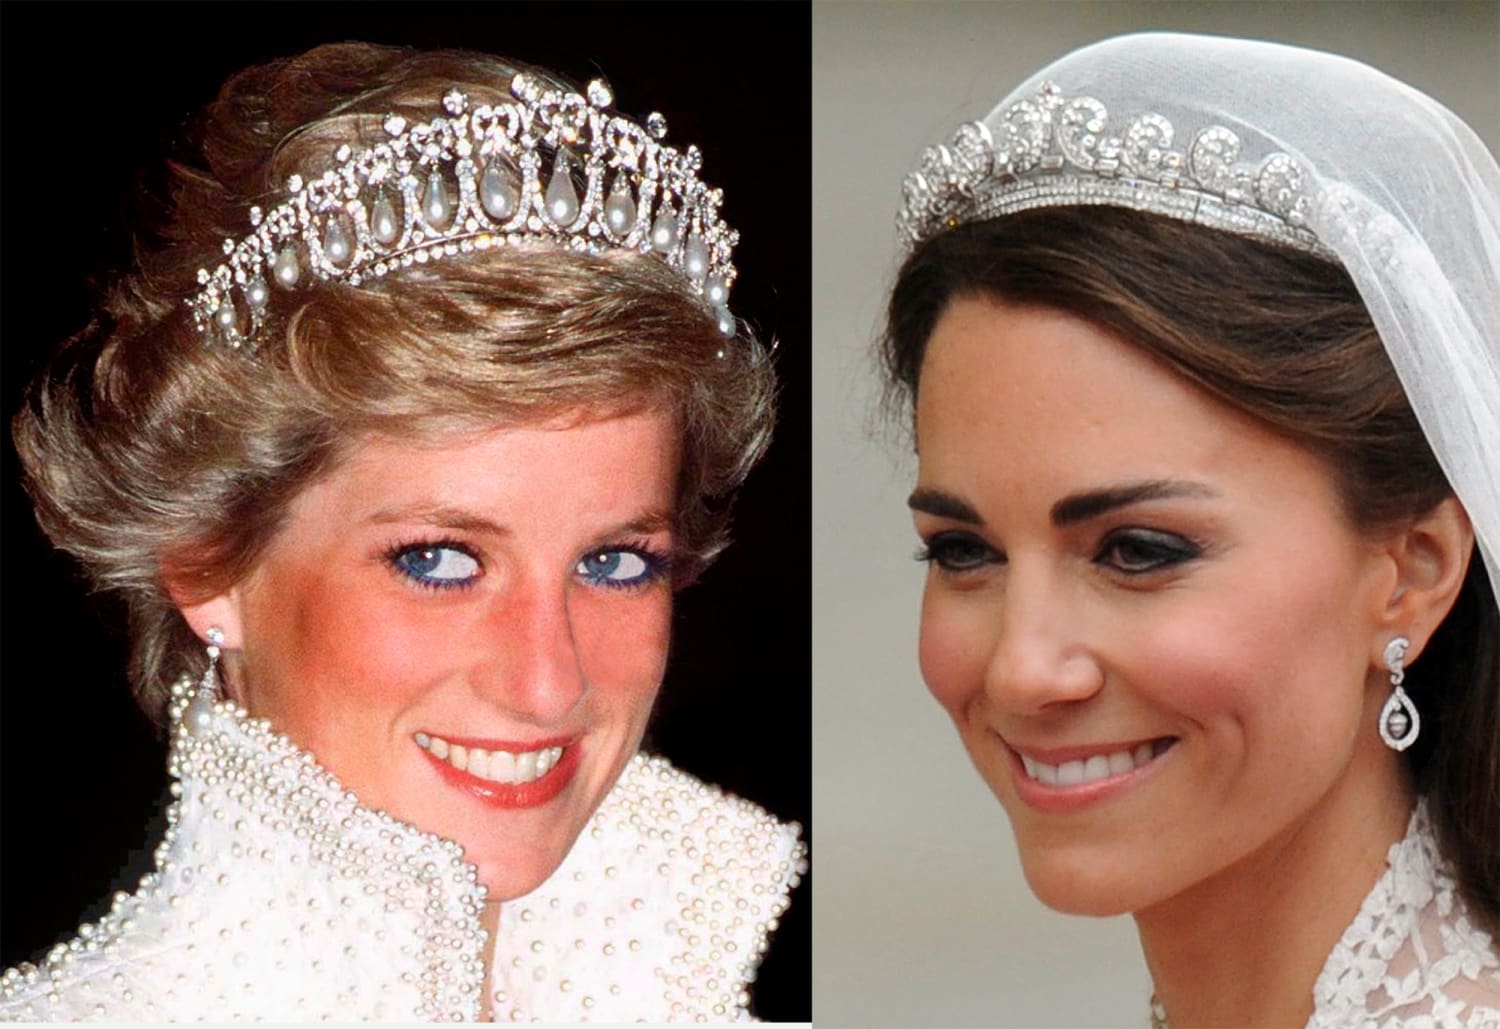 Tiaras And Crowns A Look At The Headpieces Of The British Royalty